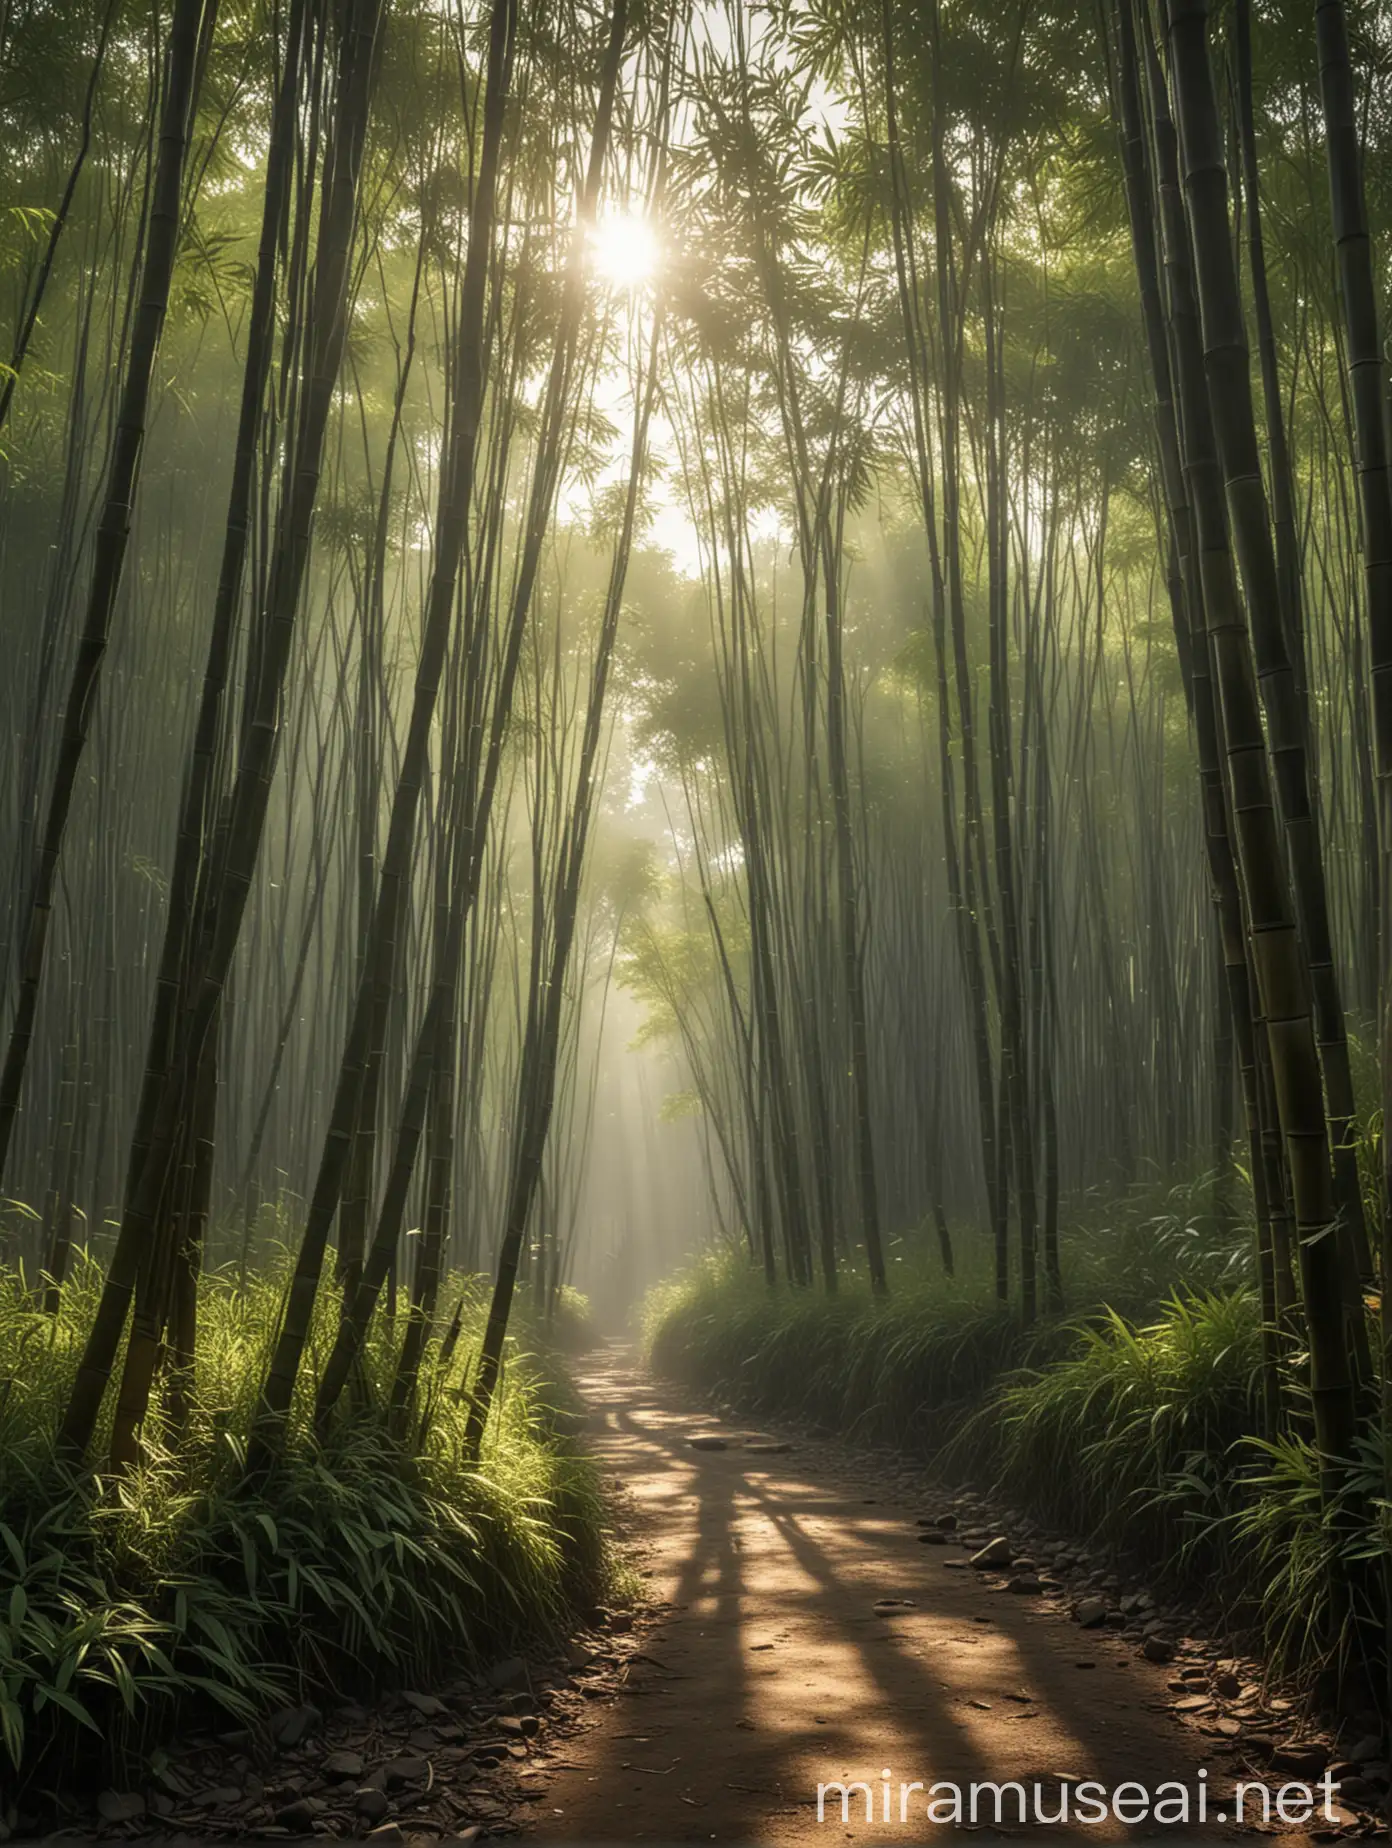 morning atmosphere in an Indonesian village.sunlight penetrates through gaps in bamboo trees.realistic.8k